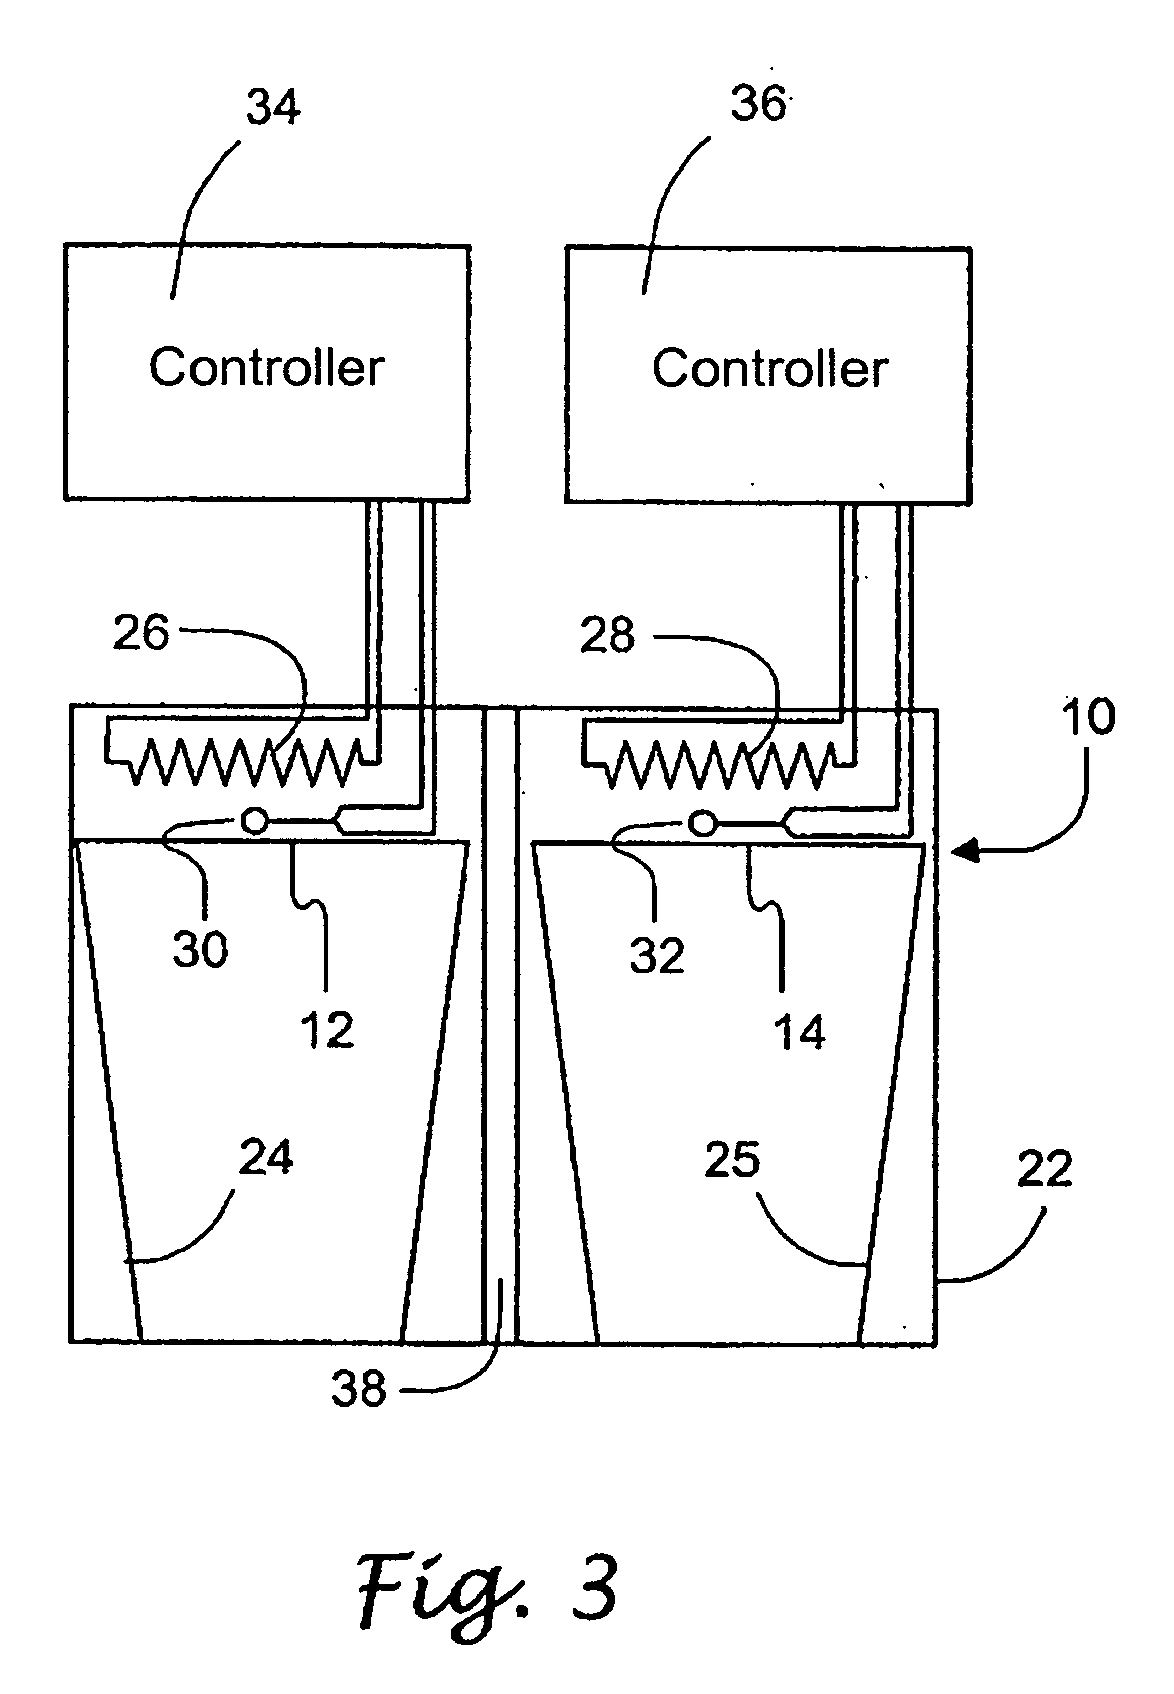 Methods and apparatus for a remote, noninvasive technique to detect core body temperature in a subject via thermal imaging